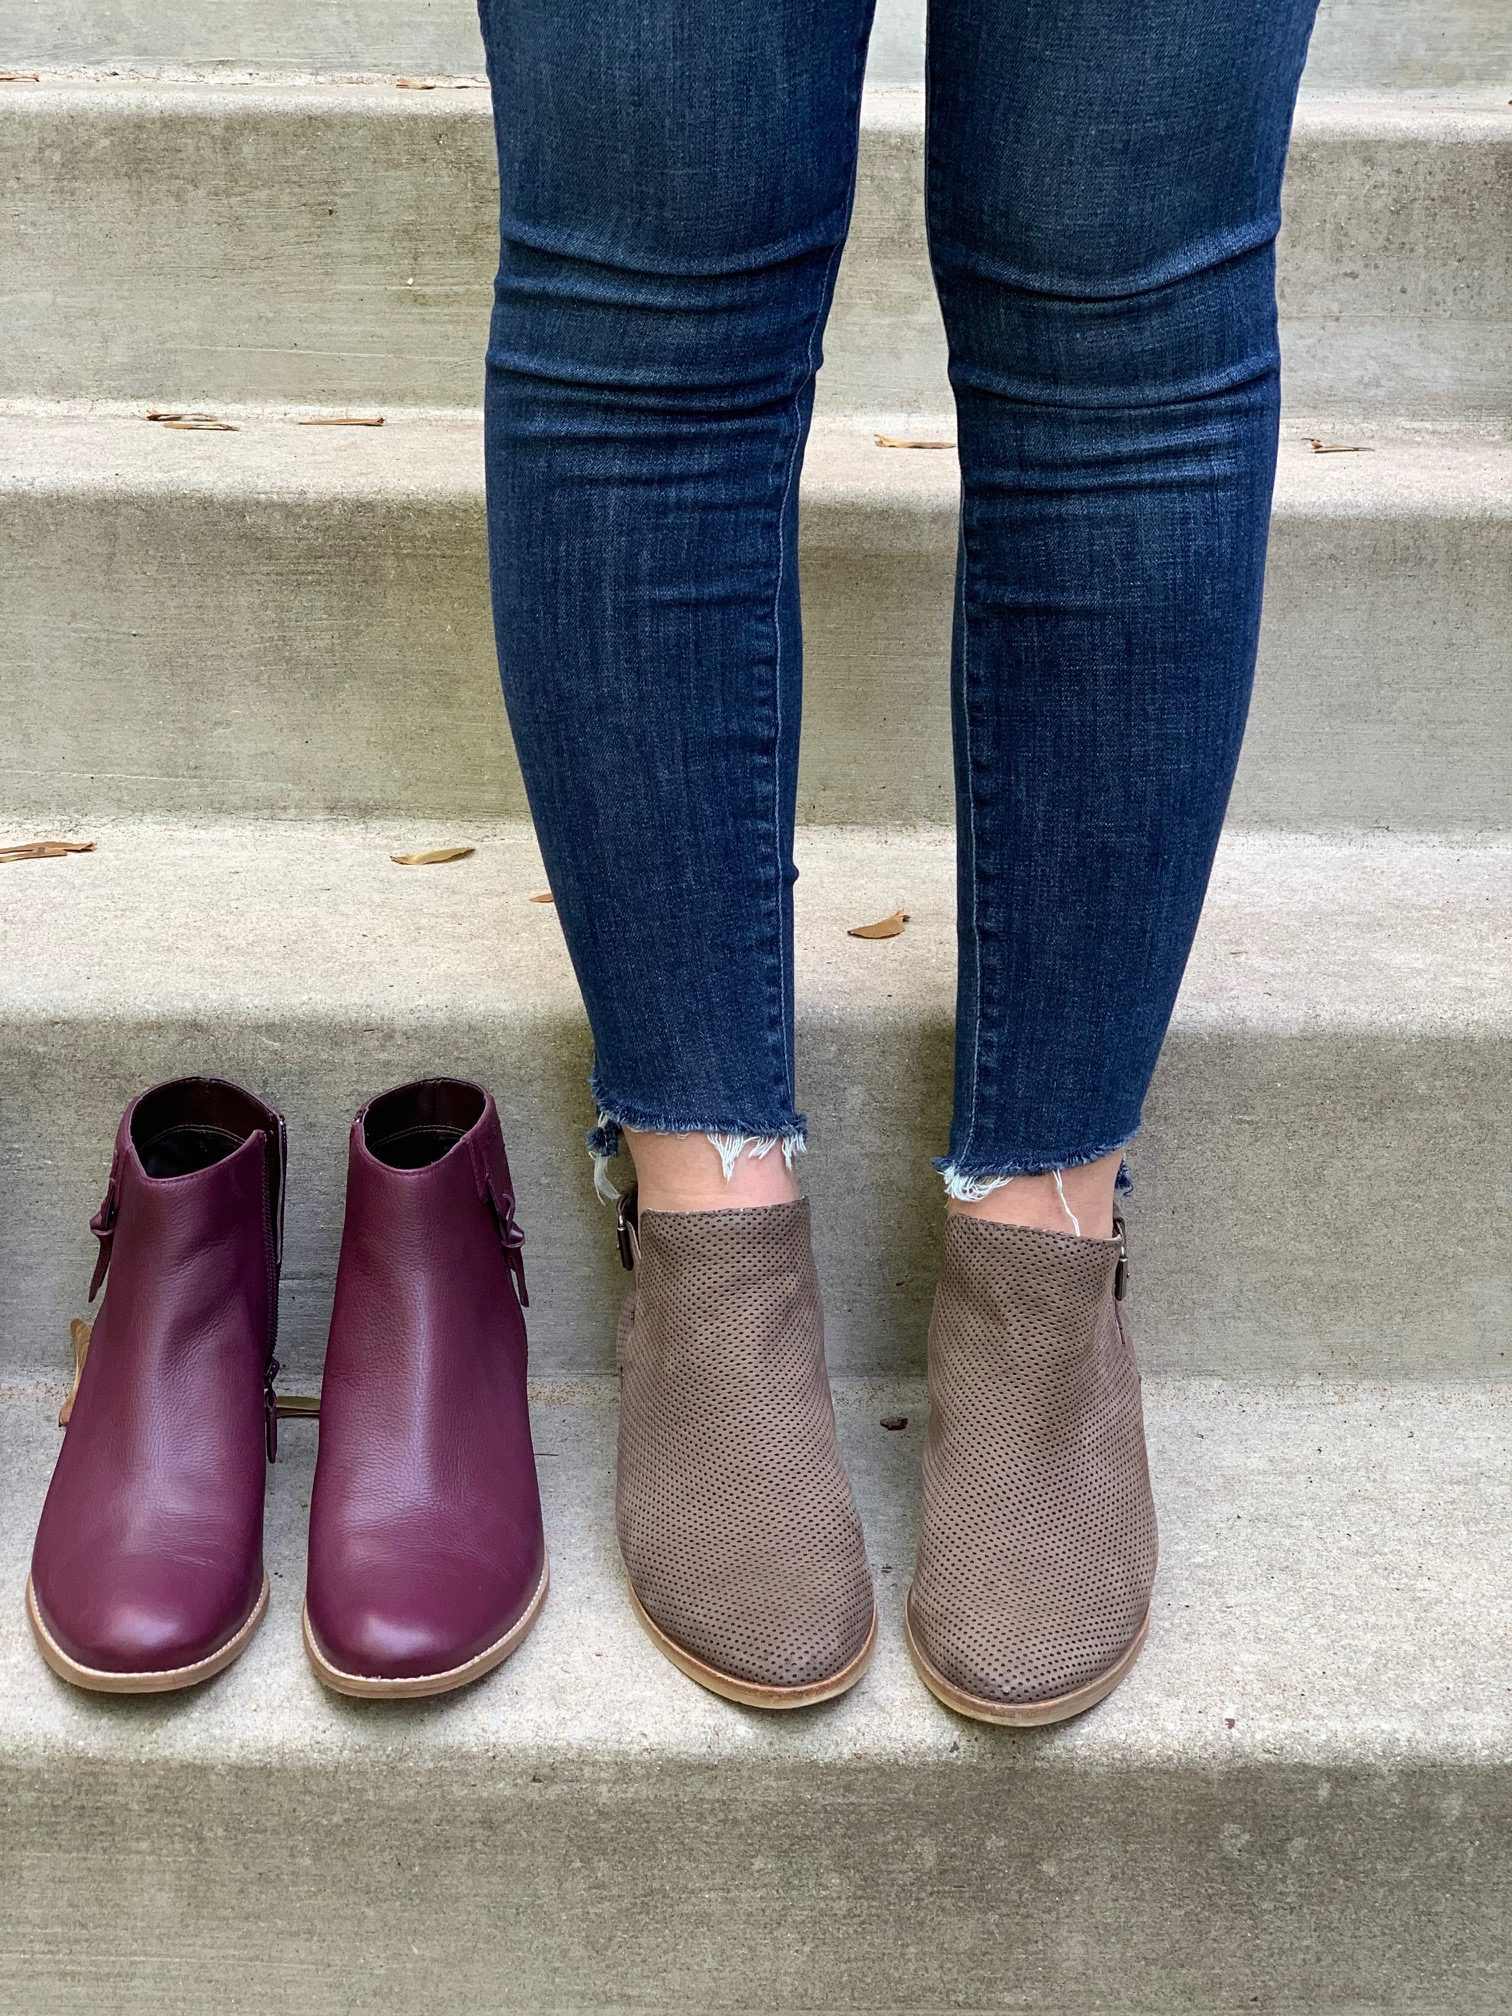 perfectly matched jeans with booties